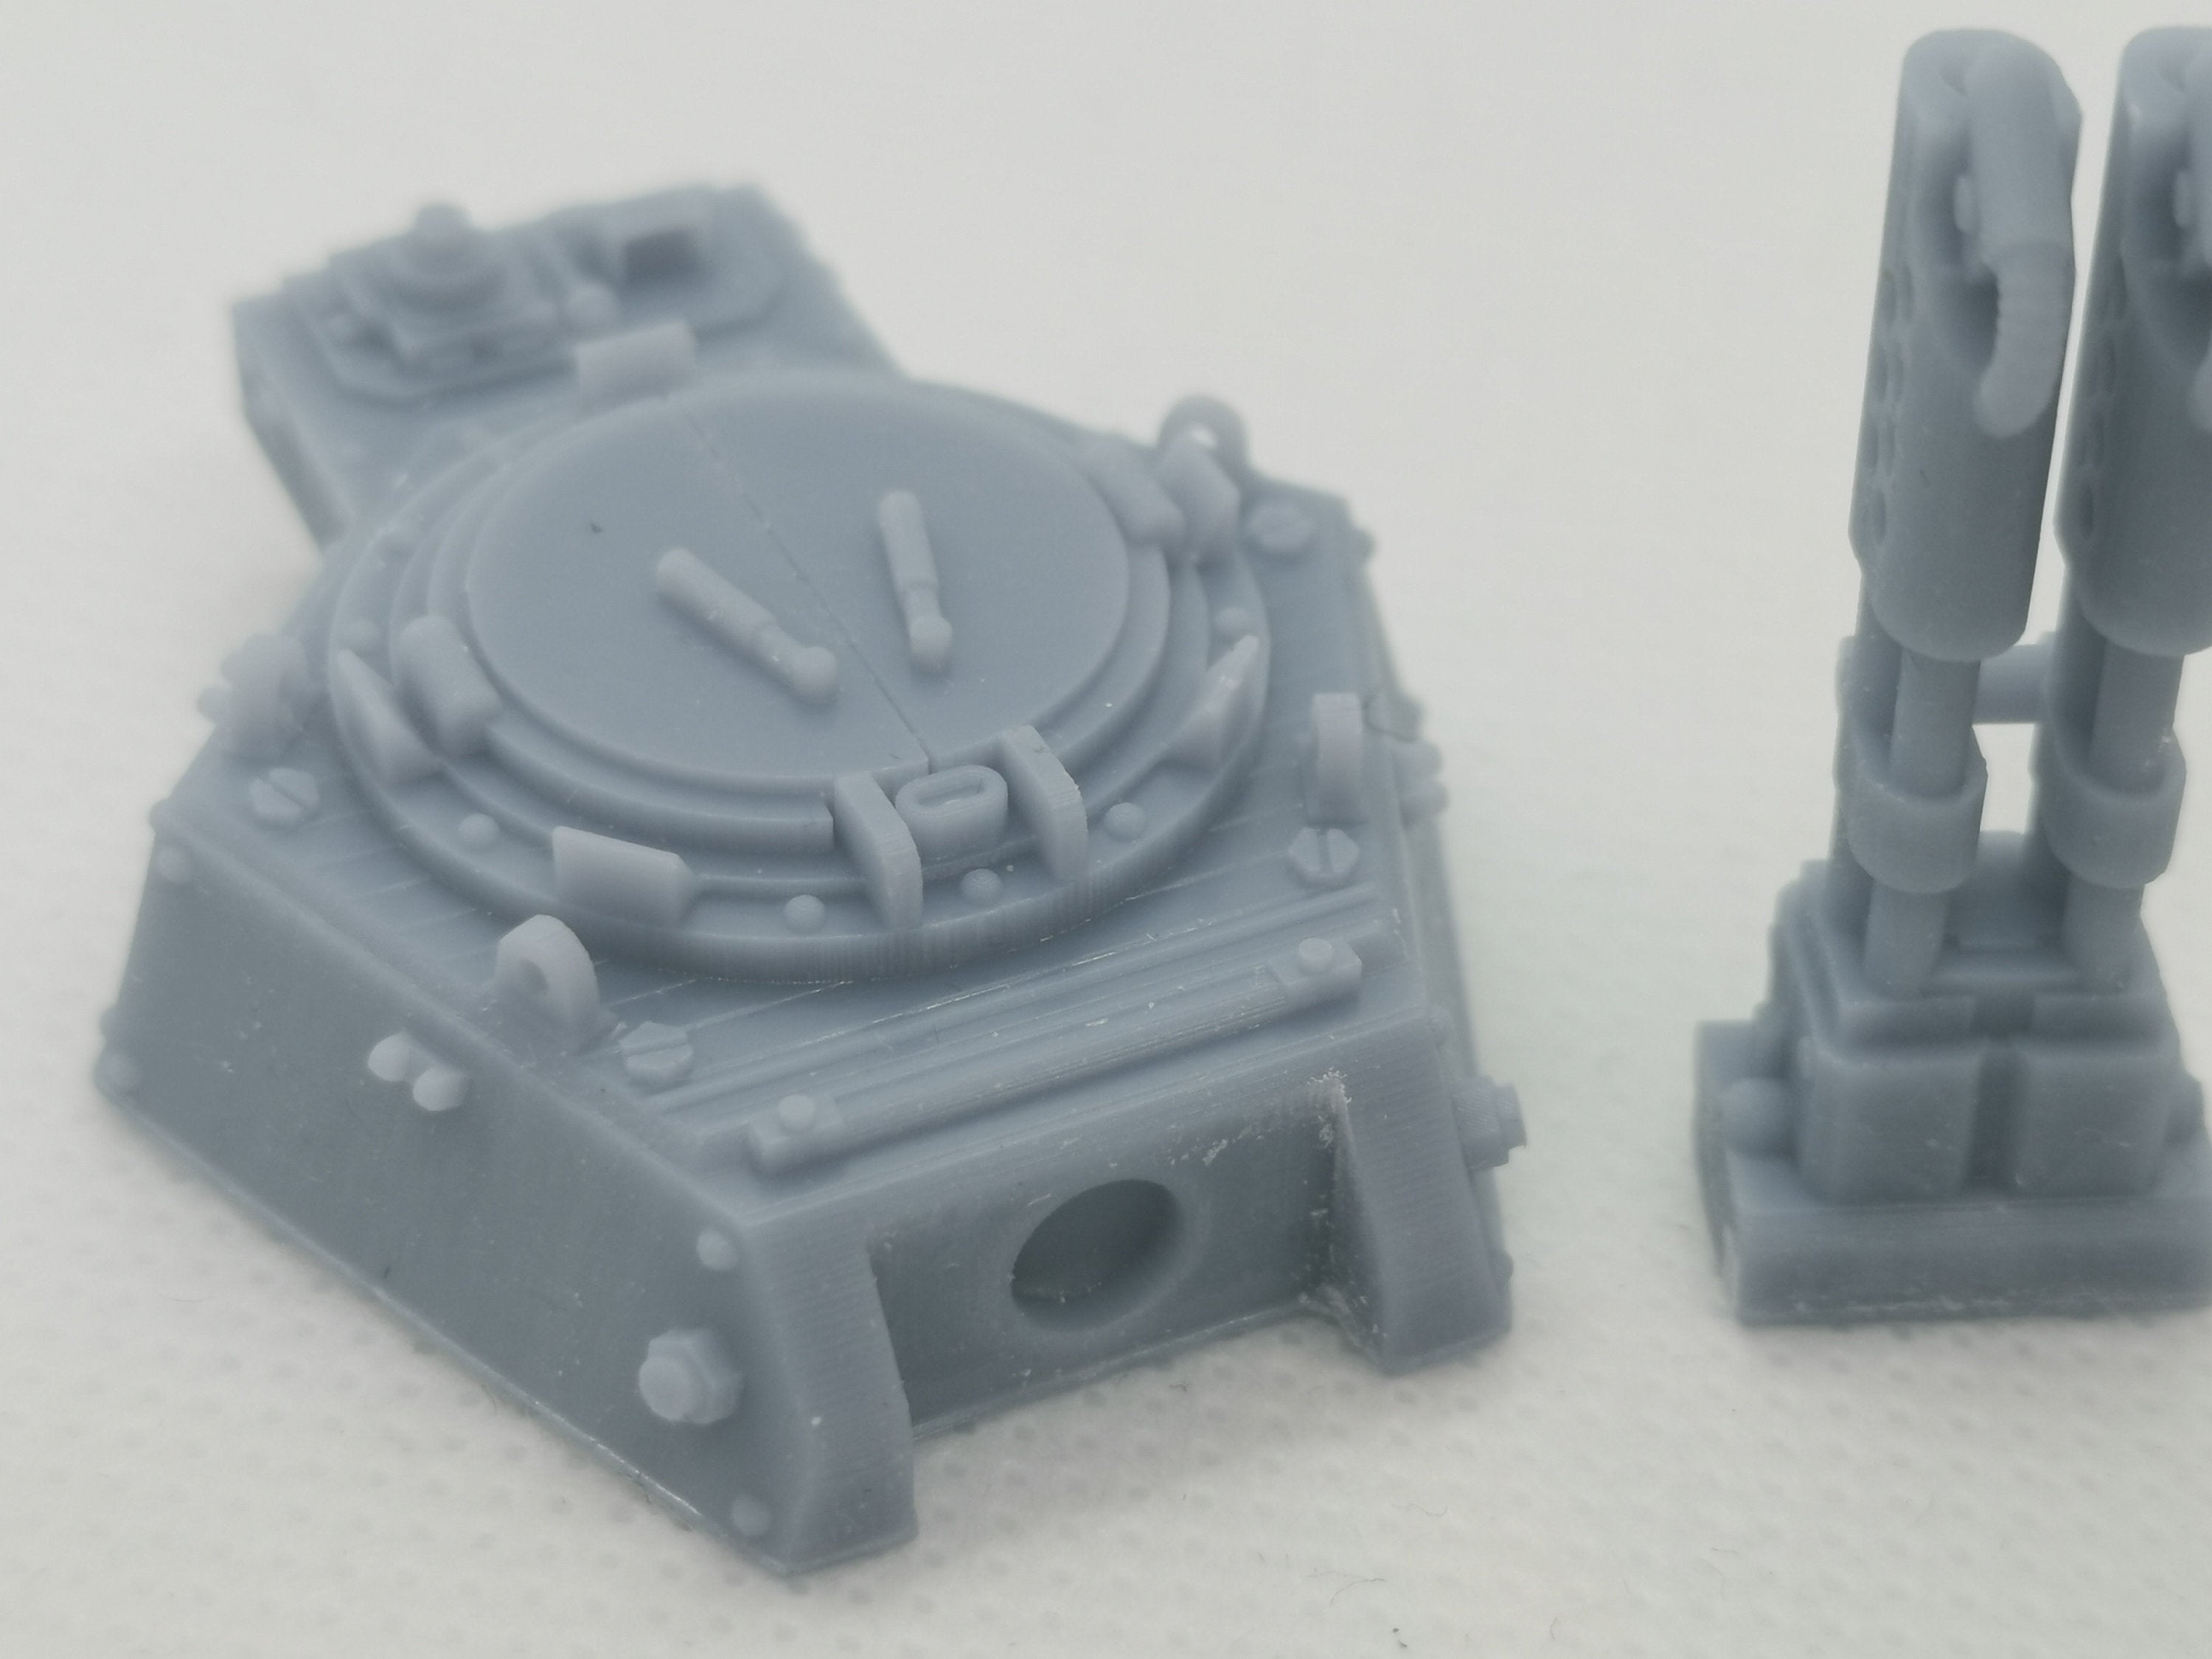 Chimera Turret & Inferno Double Heavy Flamer Cannon Warhammer Compatible